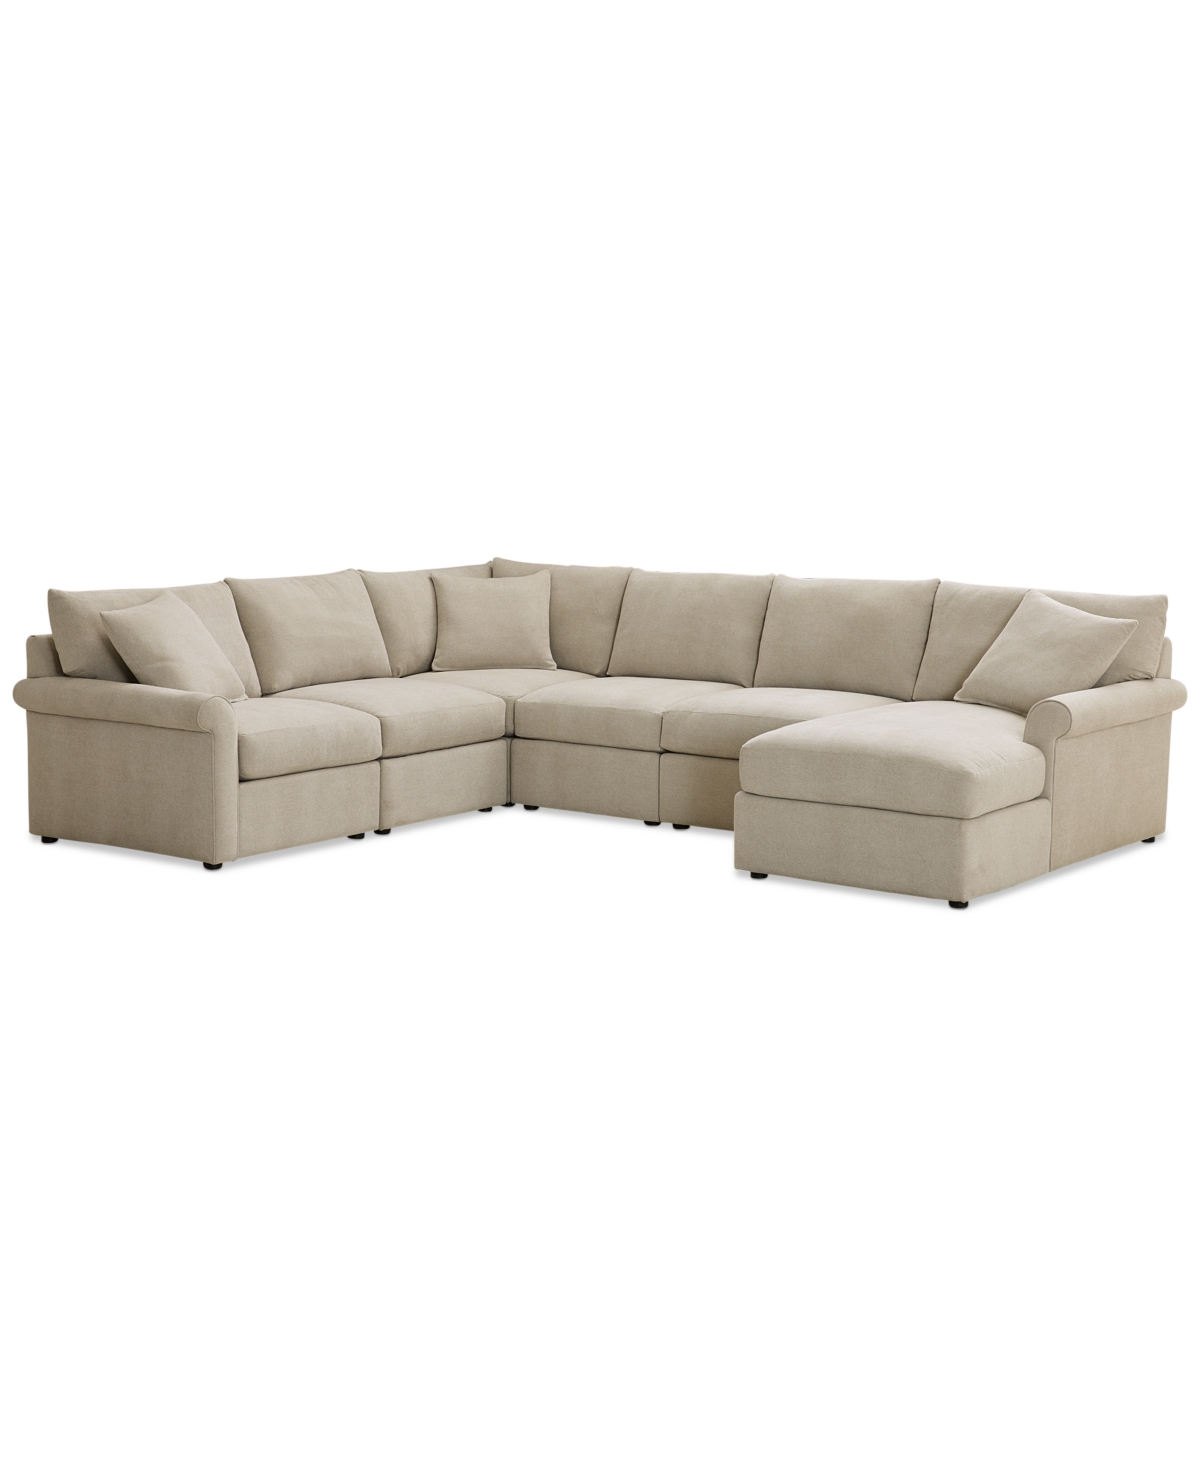 Furniture Wrenley 131" 6-pc. Fabric Modular Sectional Chaise Sofa, Created For Macy's In Dove